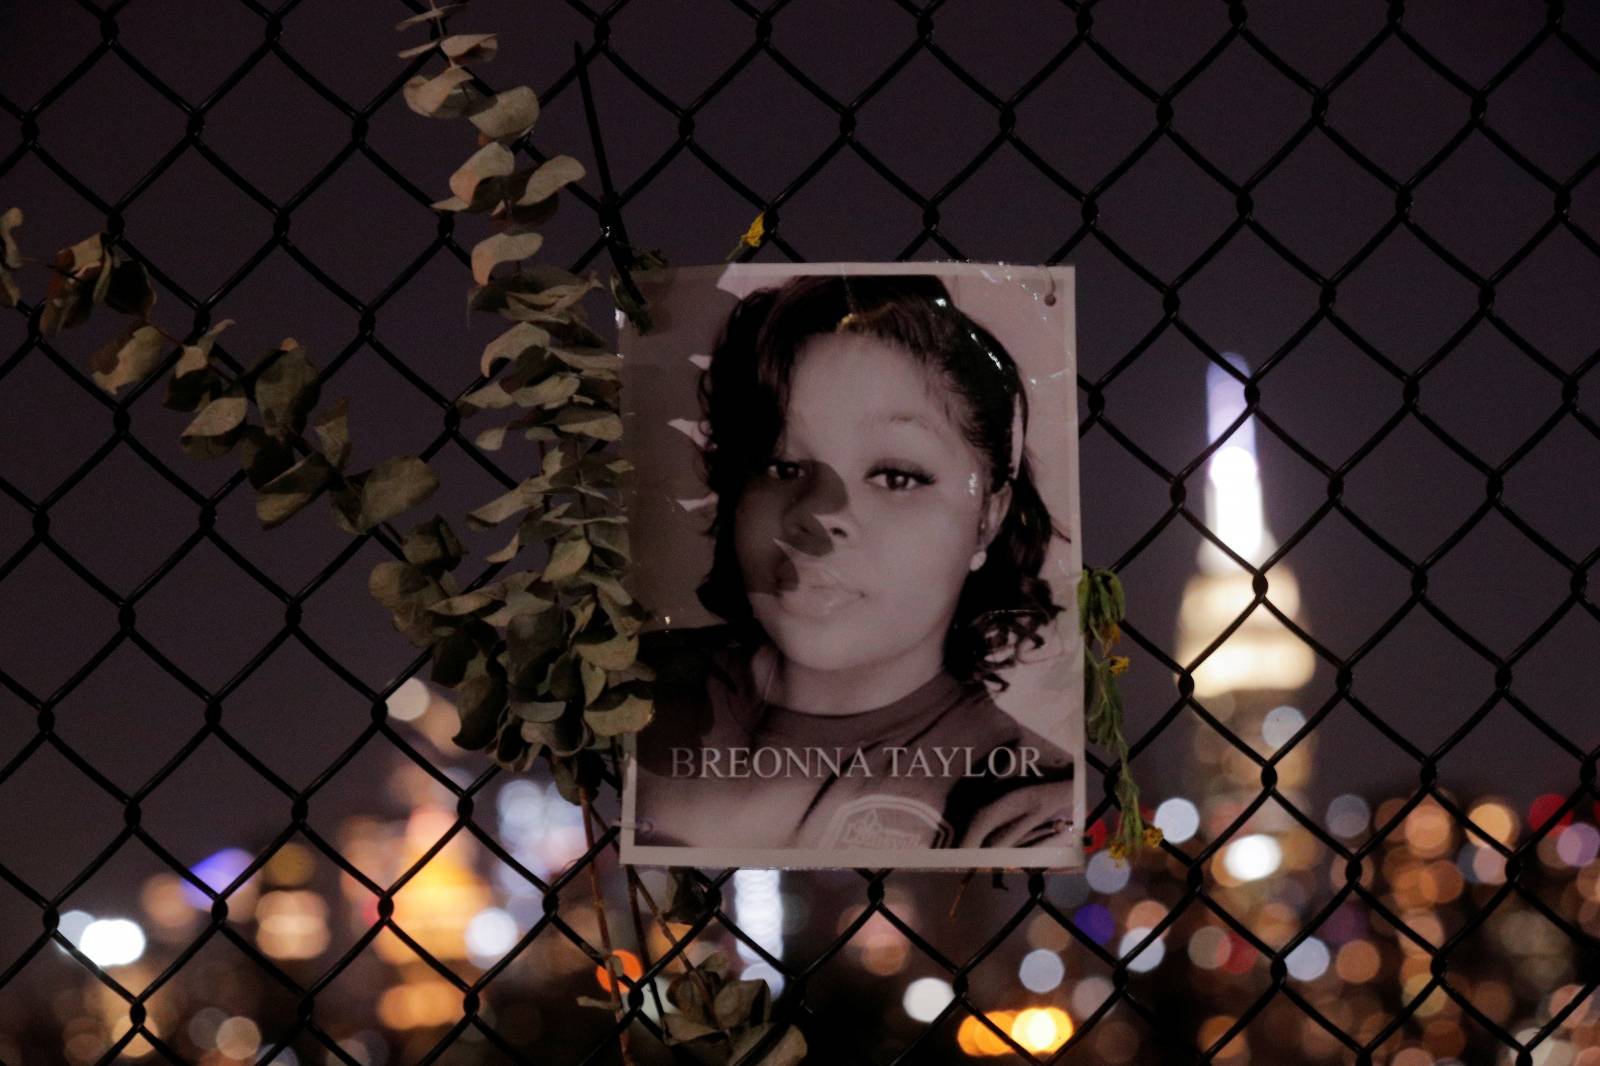 A picture of Breonna Taylor is seen at a makeshift memorial for victims of racial injustice, following the announcement of a single indictment in Taylor's case, in the Brooklyn borough of New York City